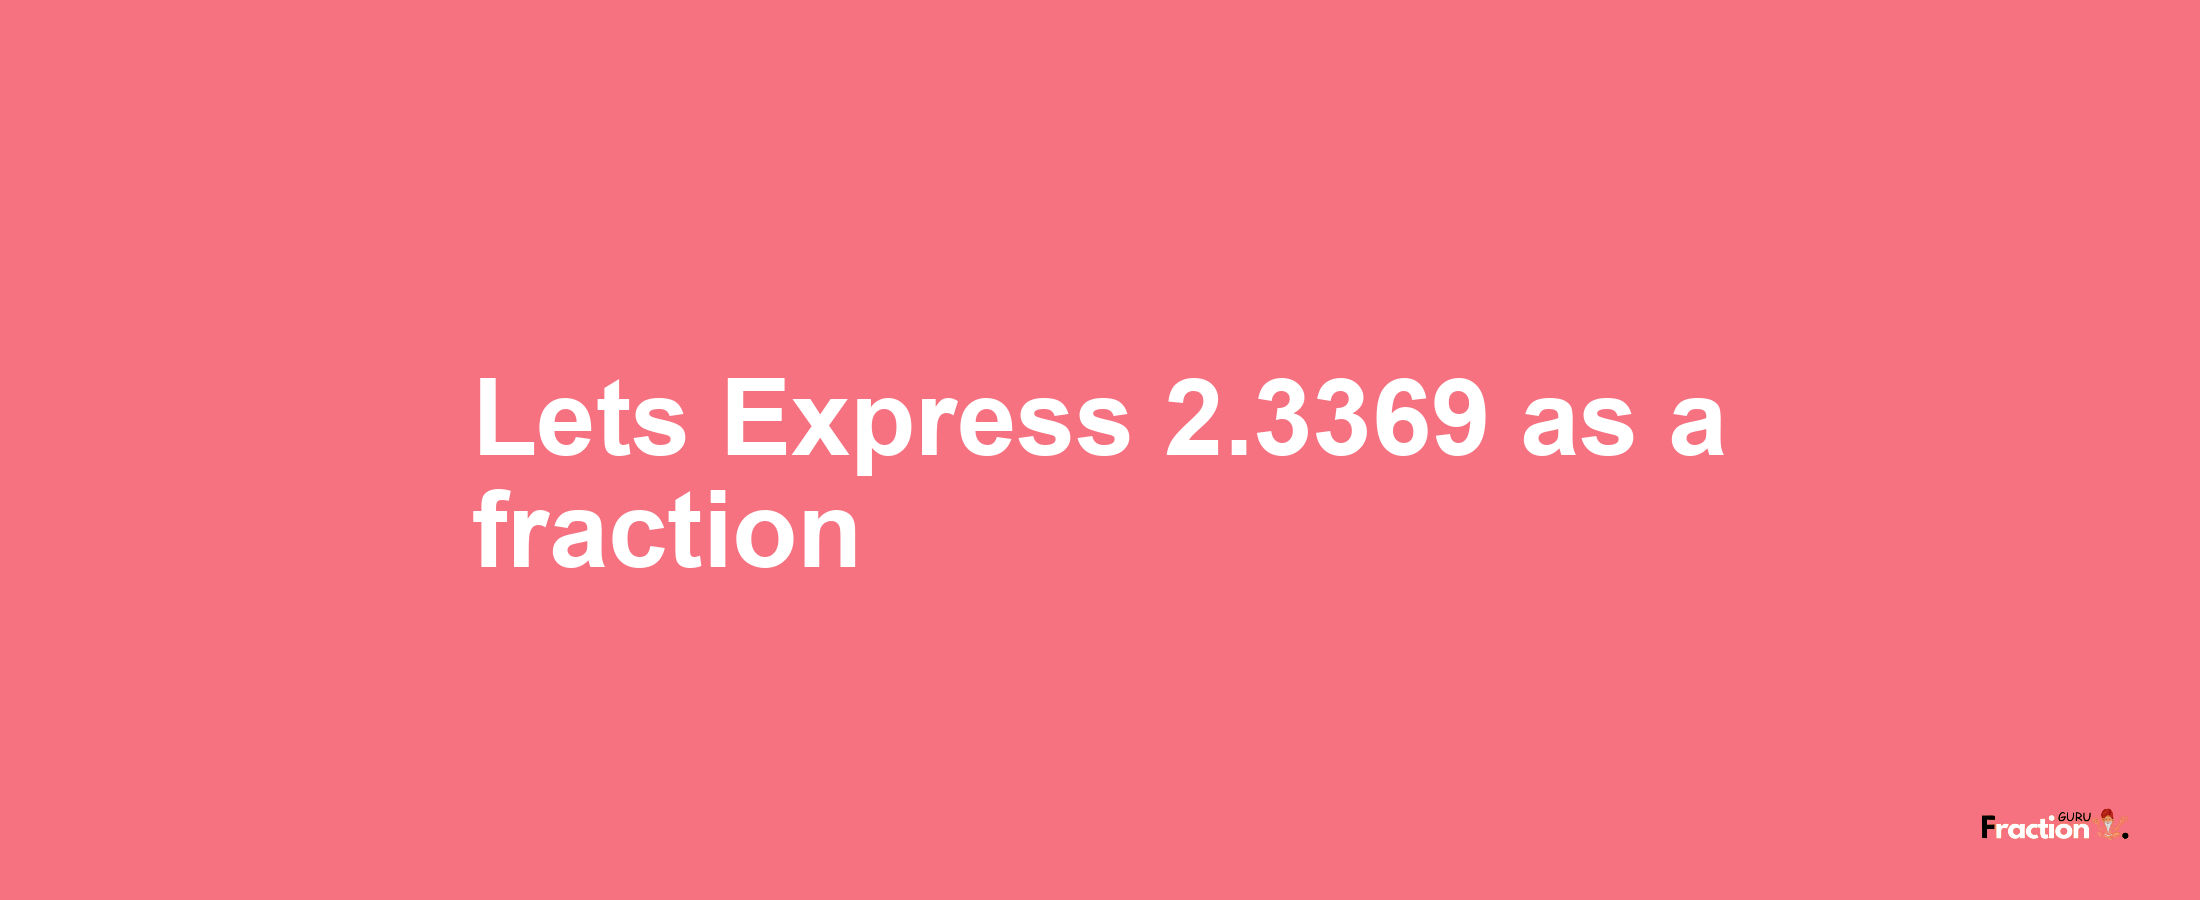 Lets Express 2.3369 as afraction